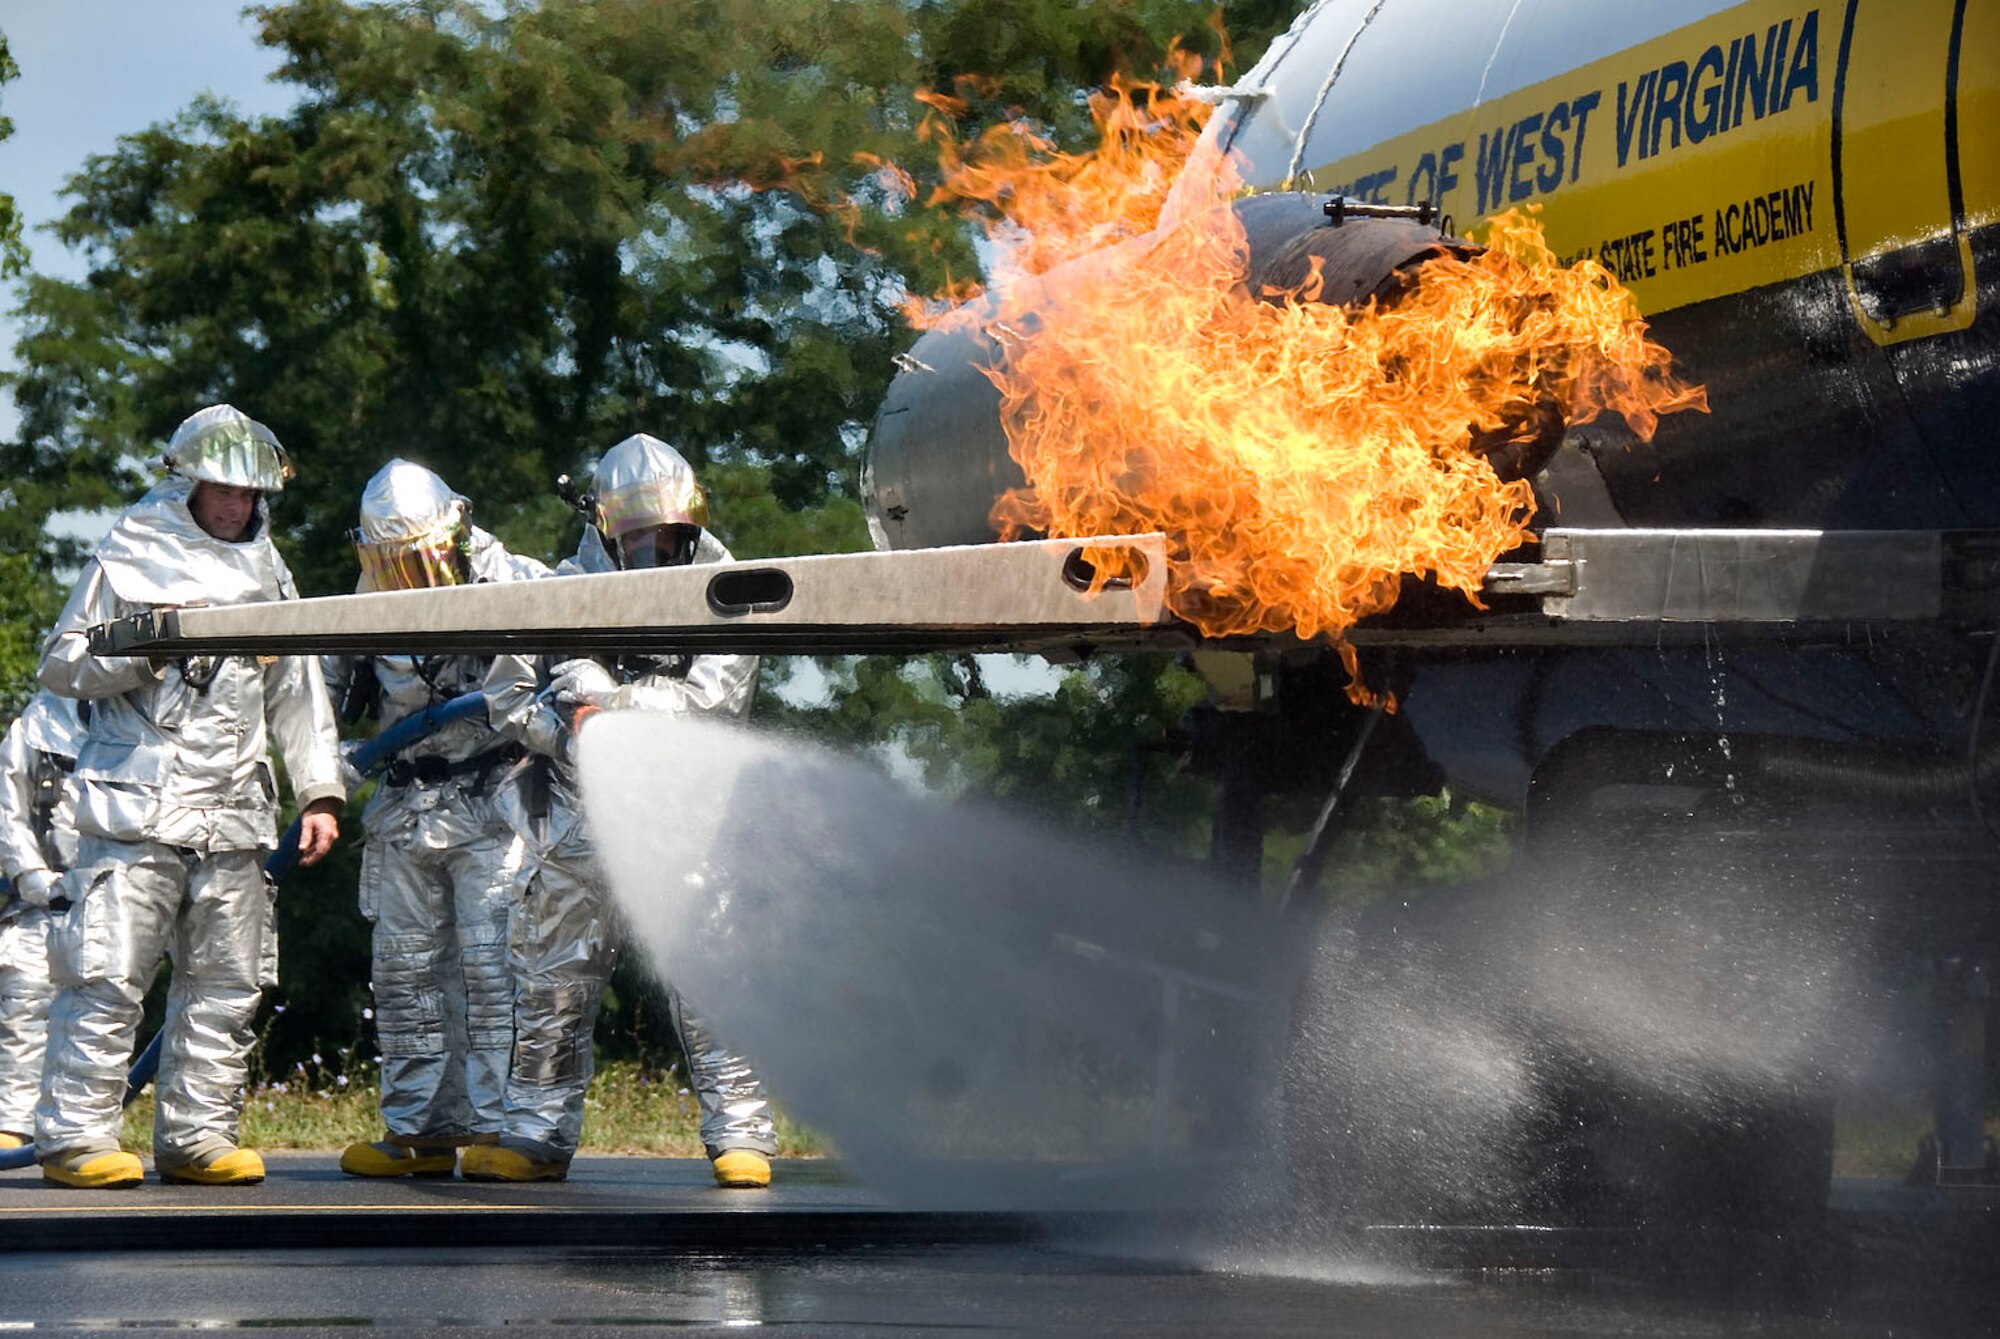 167th Airlift Wing firefighters extinguish a fire in the landing gear of a simulated aircraft during a training exercise at the Martinsburg, WVa air base on Wednesday, July 15, 2009. The West Virginia State Fire Academy provided the training for firefighters to become certified on Aircraft Firefighting or ARFF which is an annual requirement. (U.S. Air Force photo by Master Sgt Emily Beightol-Deyerle)